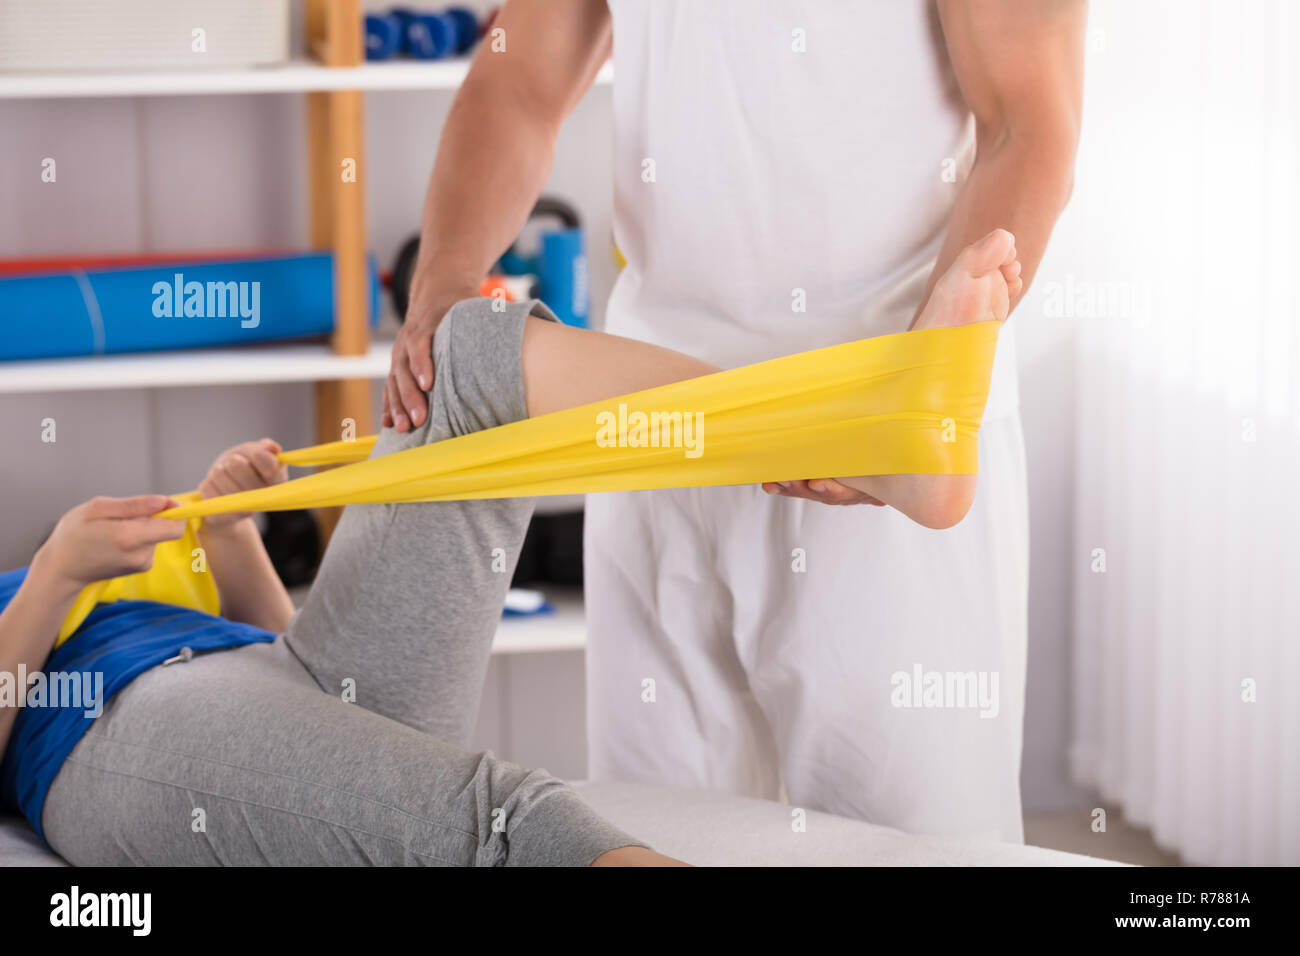 Physiotherapist Giving Leg Treatment With Exercise Band Stock Photo